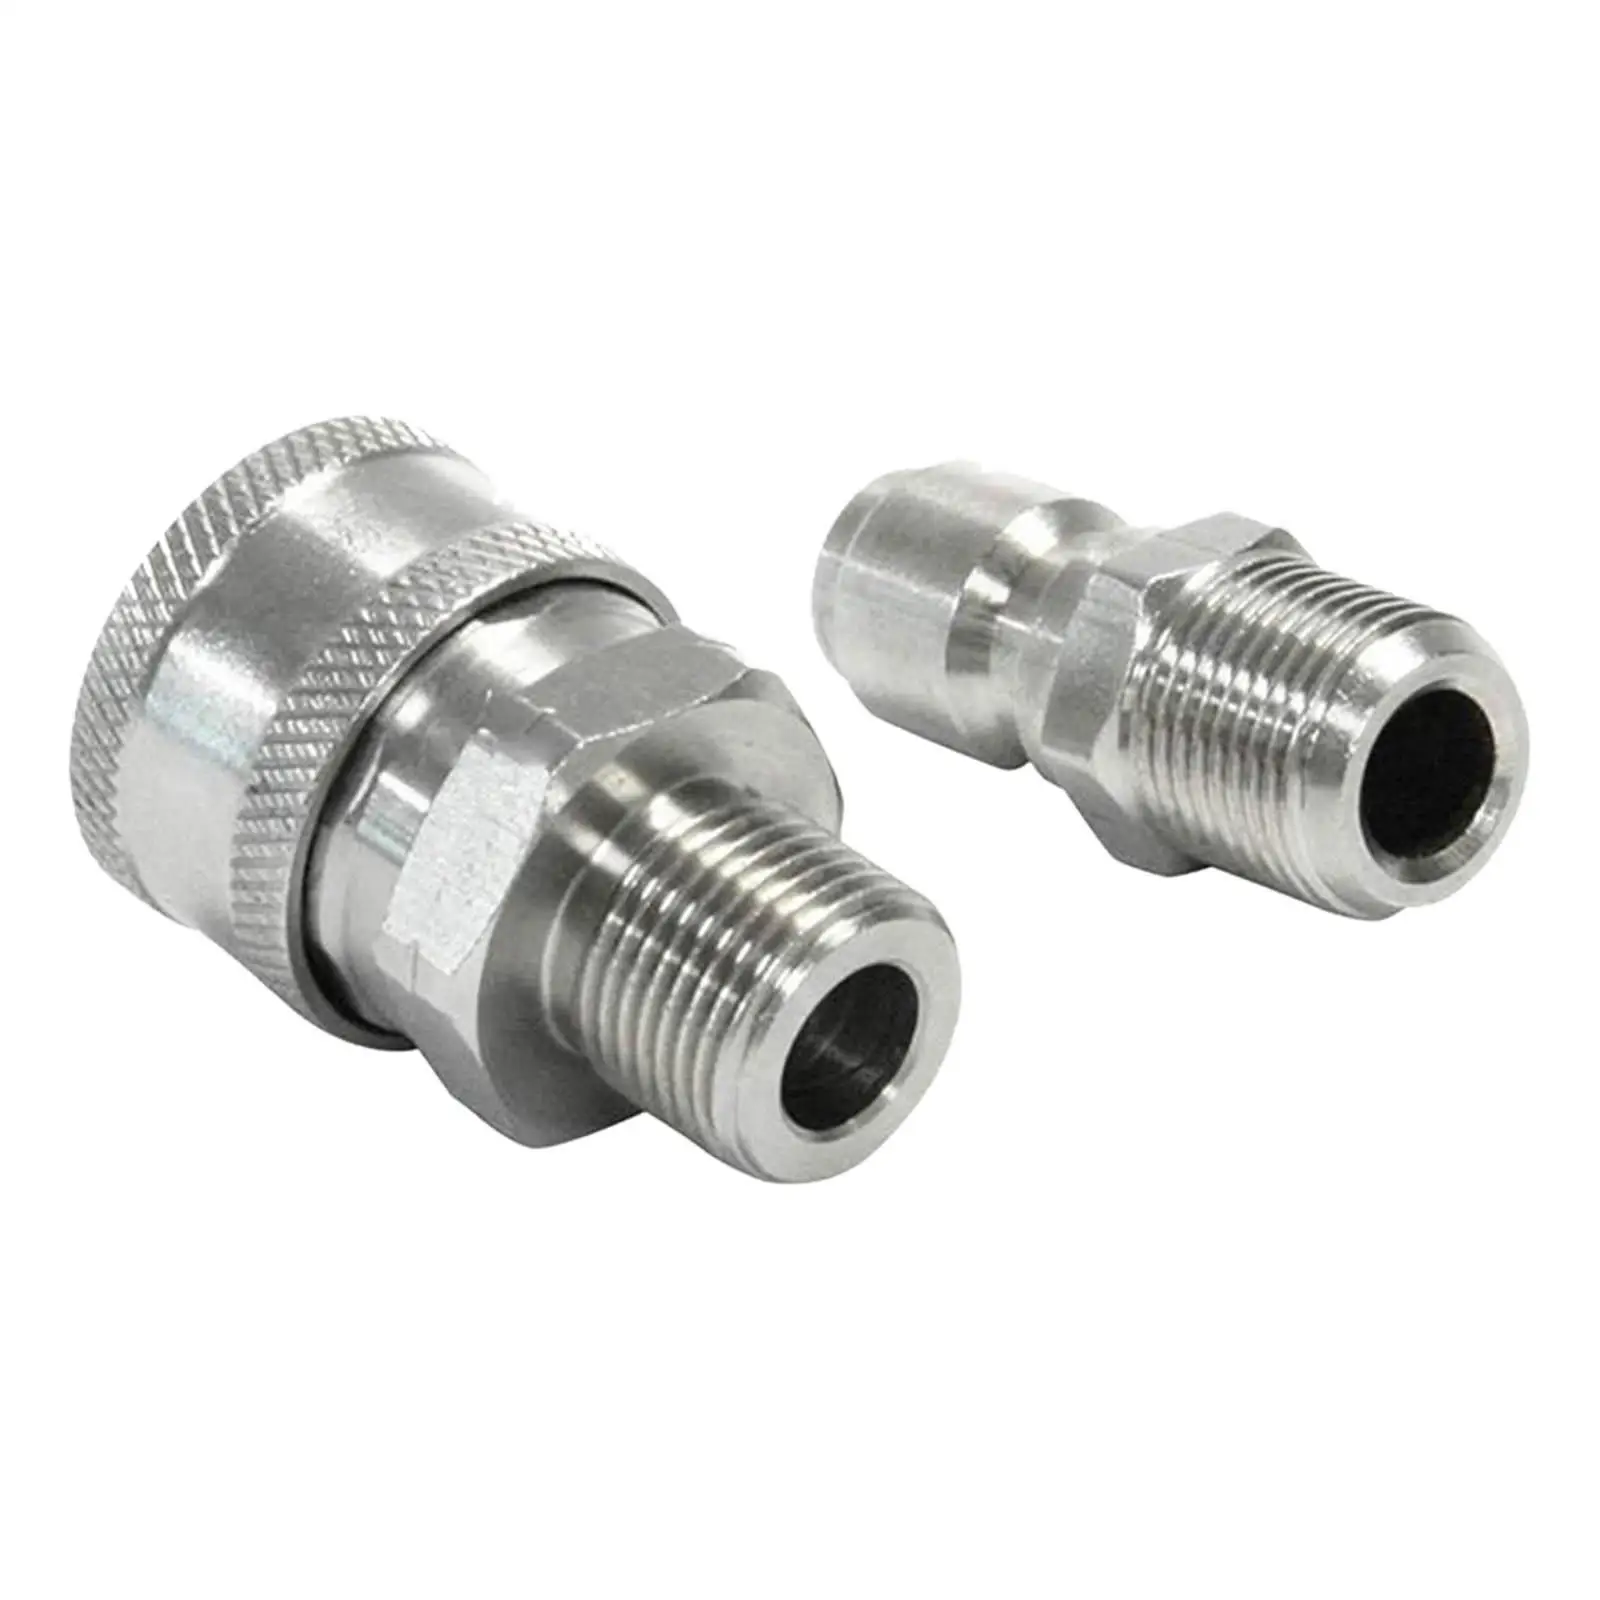 2Pcs Pressure Washer Adapter Set 3/8 inch Quick Connect Kit Water Pump Surface Cleaner Quick Release Connector Not Easy to Leak